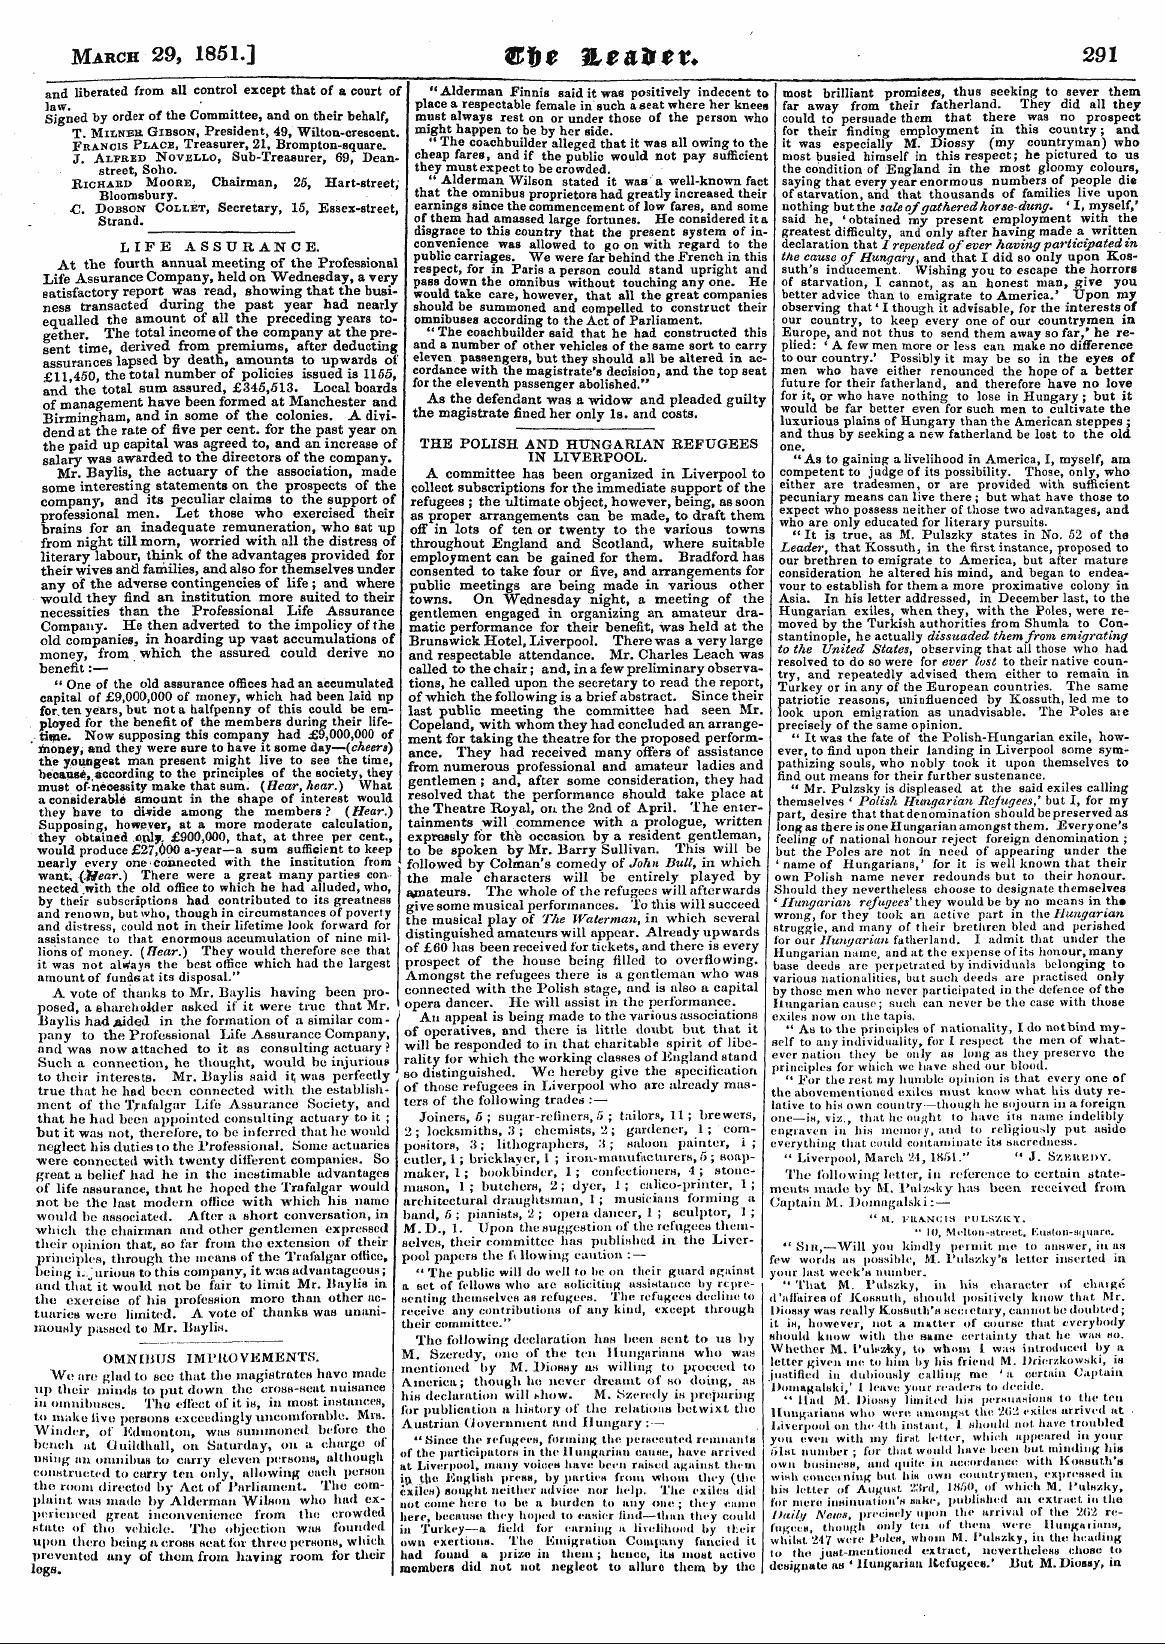 Leader (1850-1860): jS F Y, Country edition - March 29, 1851.] ®Jh ^ Wlt&Ttu 291